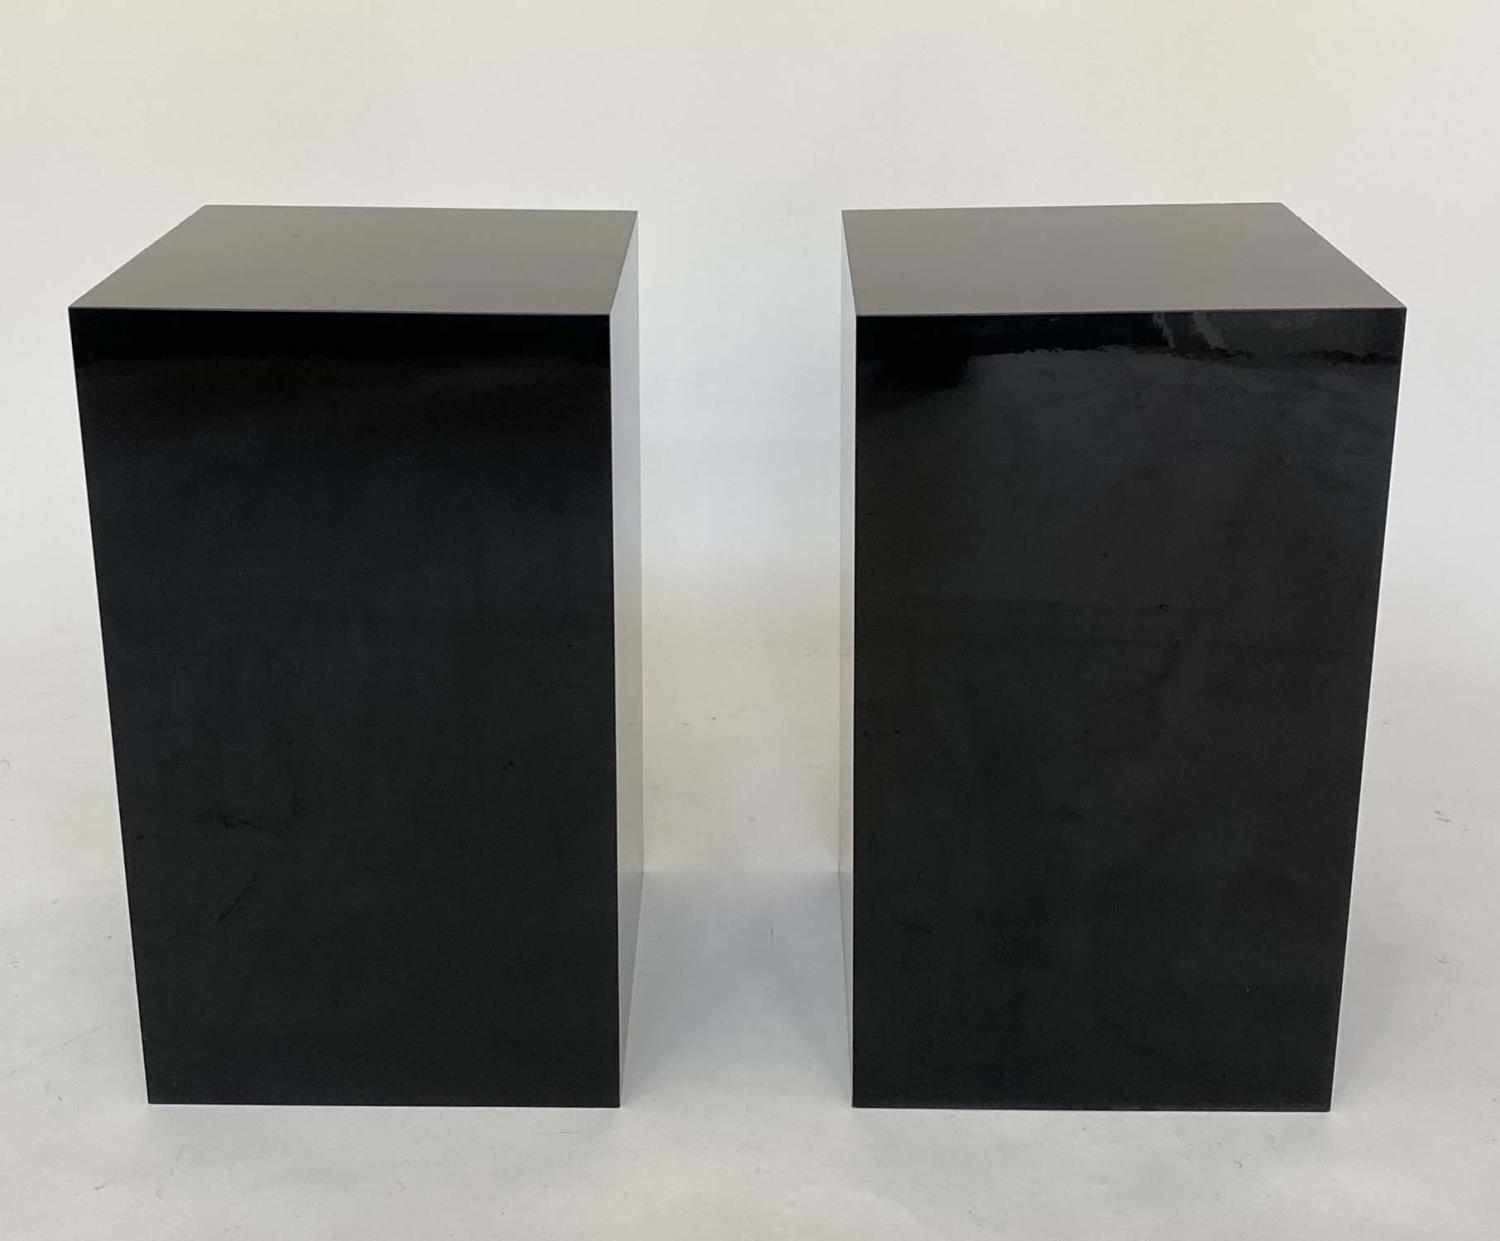 LAMP TABLE PLINTHS, a pair, black polished lucite square section form. (2) - Image 2 of 4